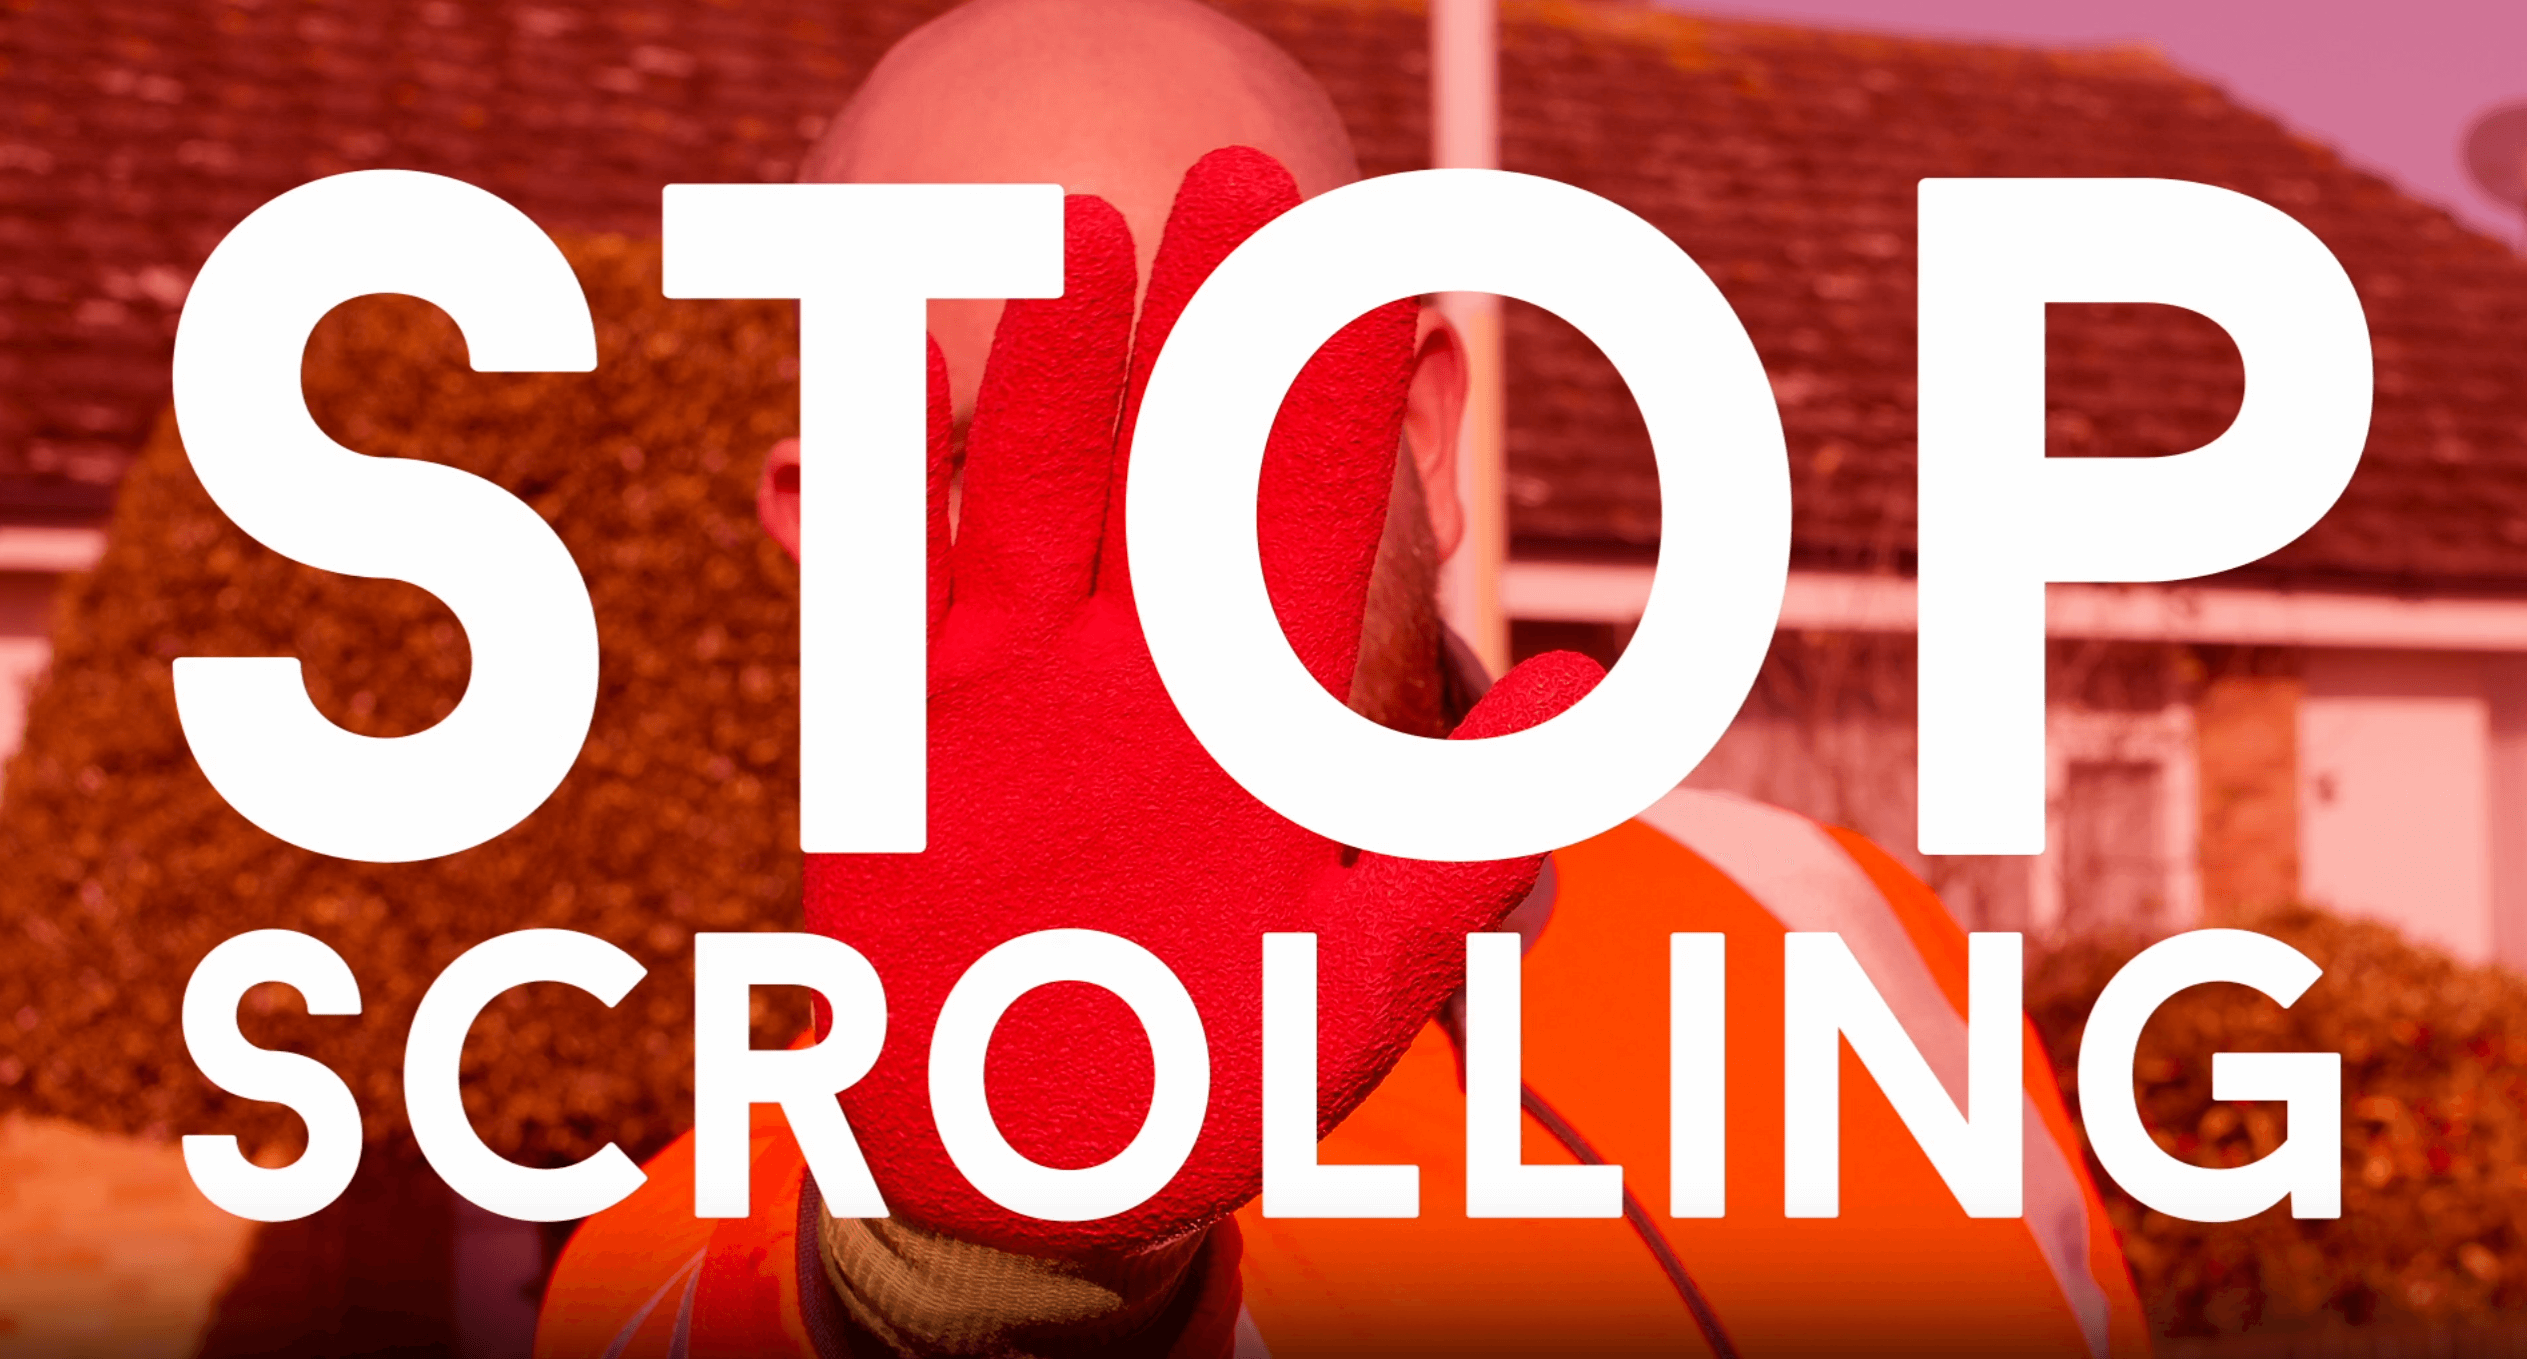 Person in an orange safety vest and red glove holds up hand with large white text "STOP SCROLLING" overlaying the image.